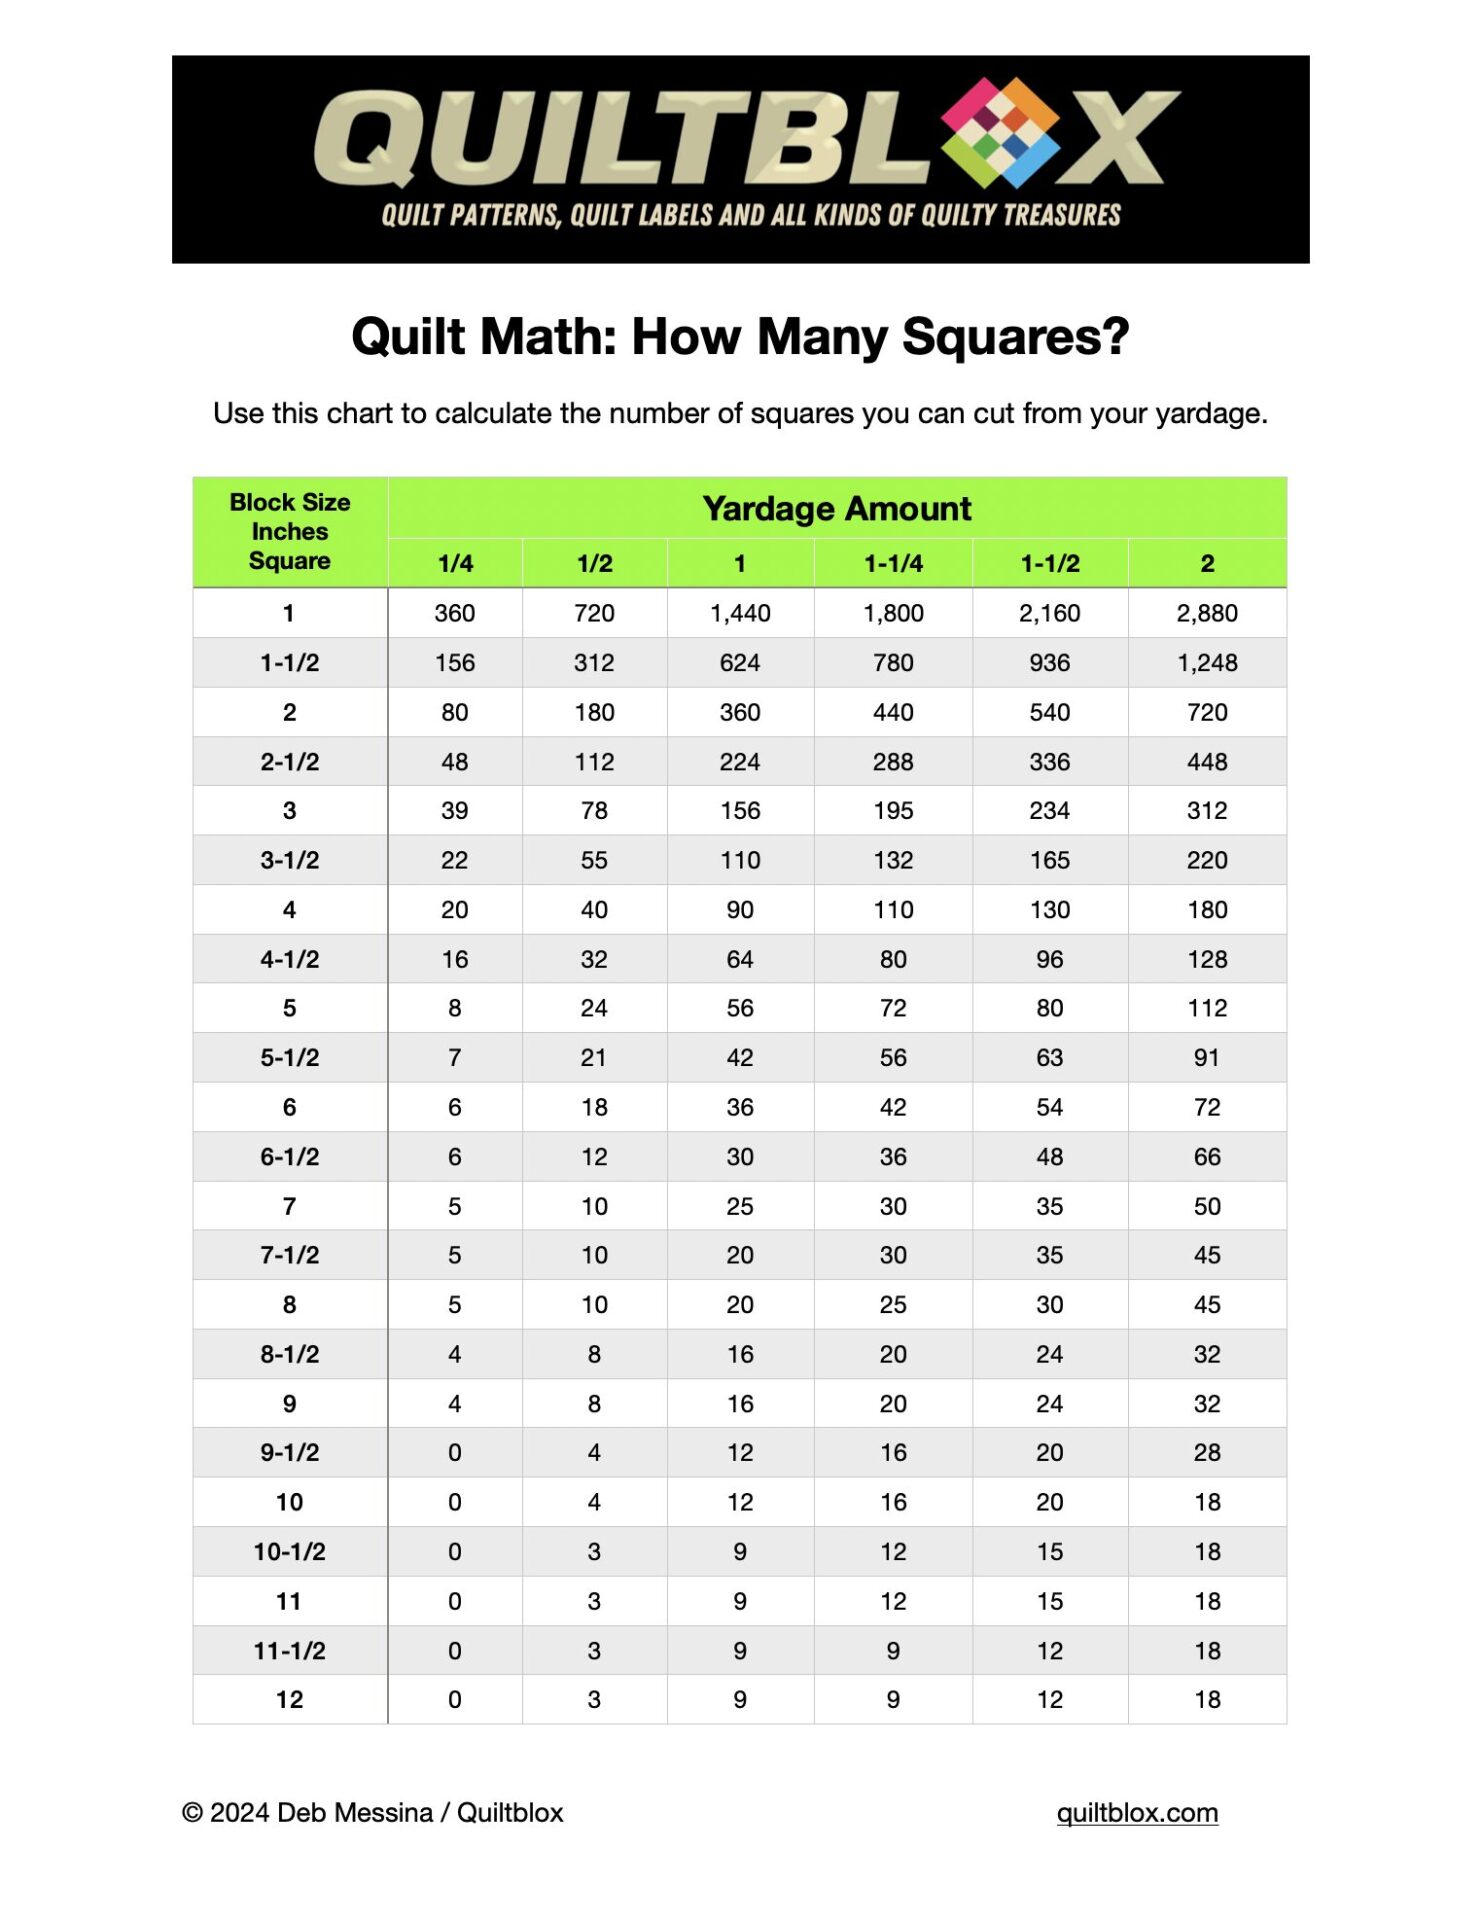 Number of Cut Squares From Yardage